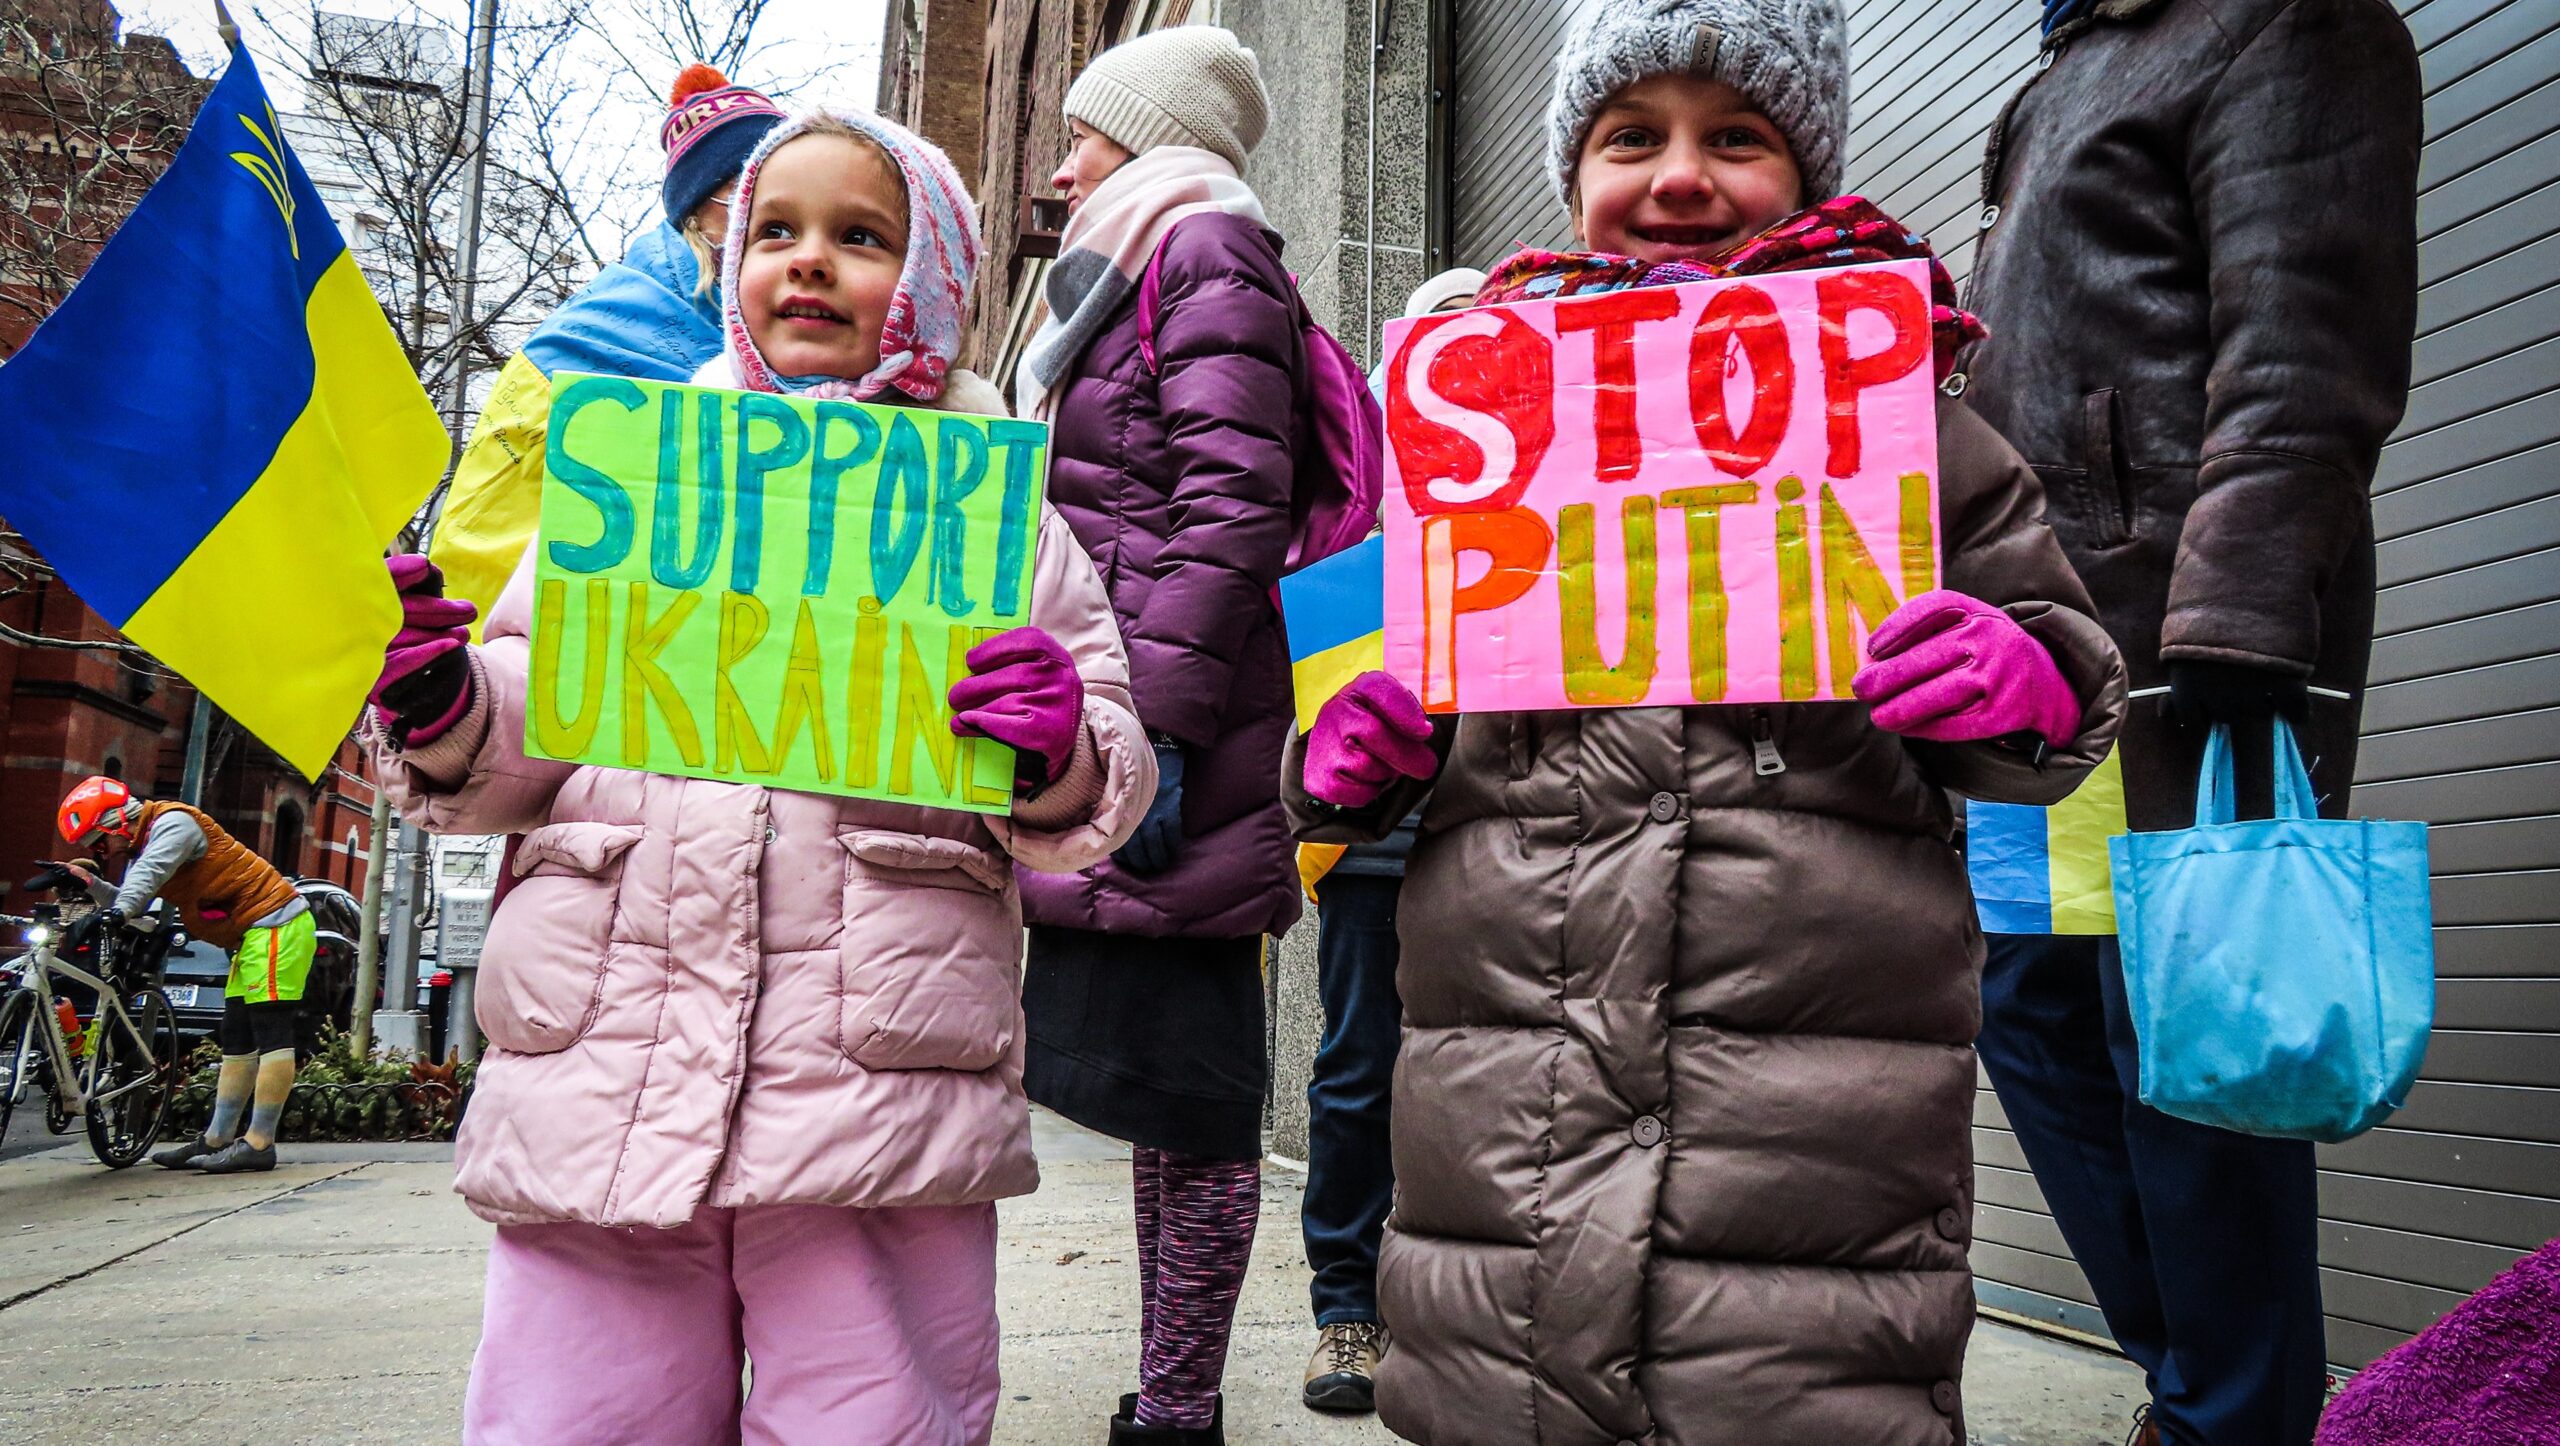 How The Fallout of the Ukraine Conflict Will Impact Small Businesses